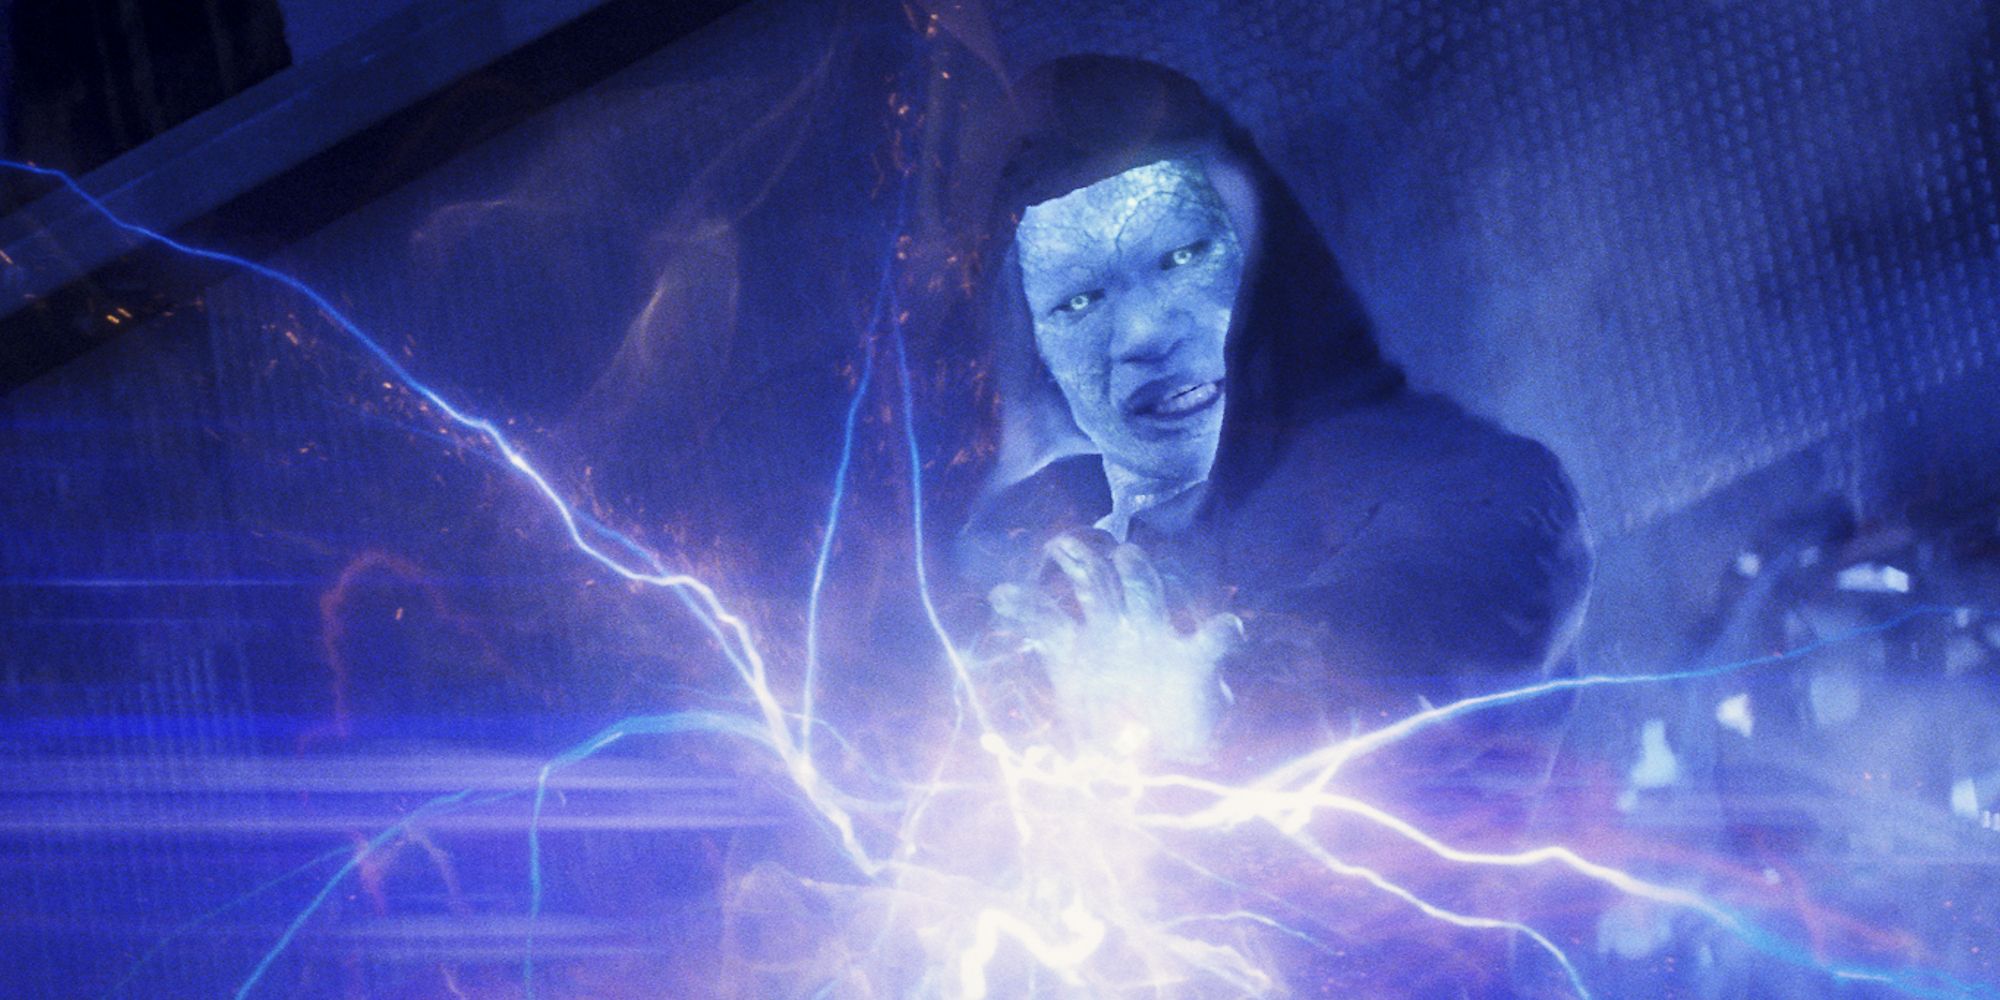 Electro shoots lightning at Spider-Man The Amazing Spider-Man 2